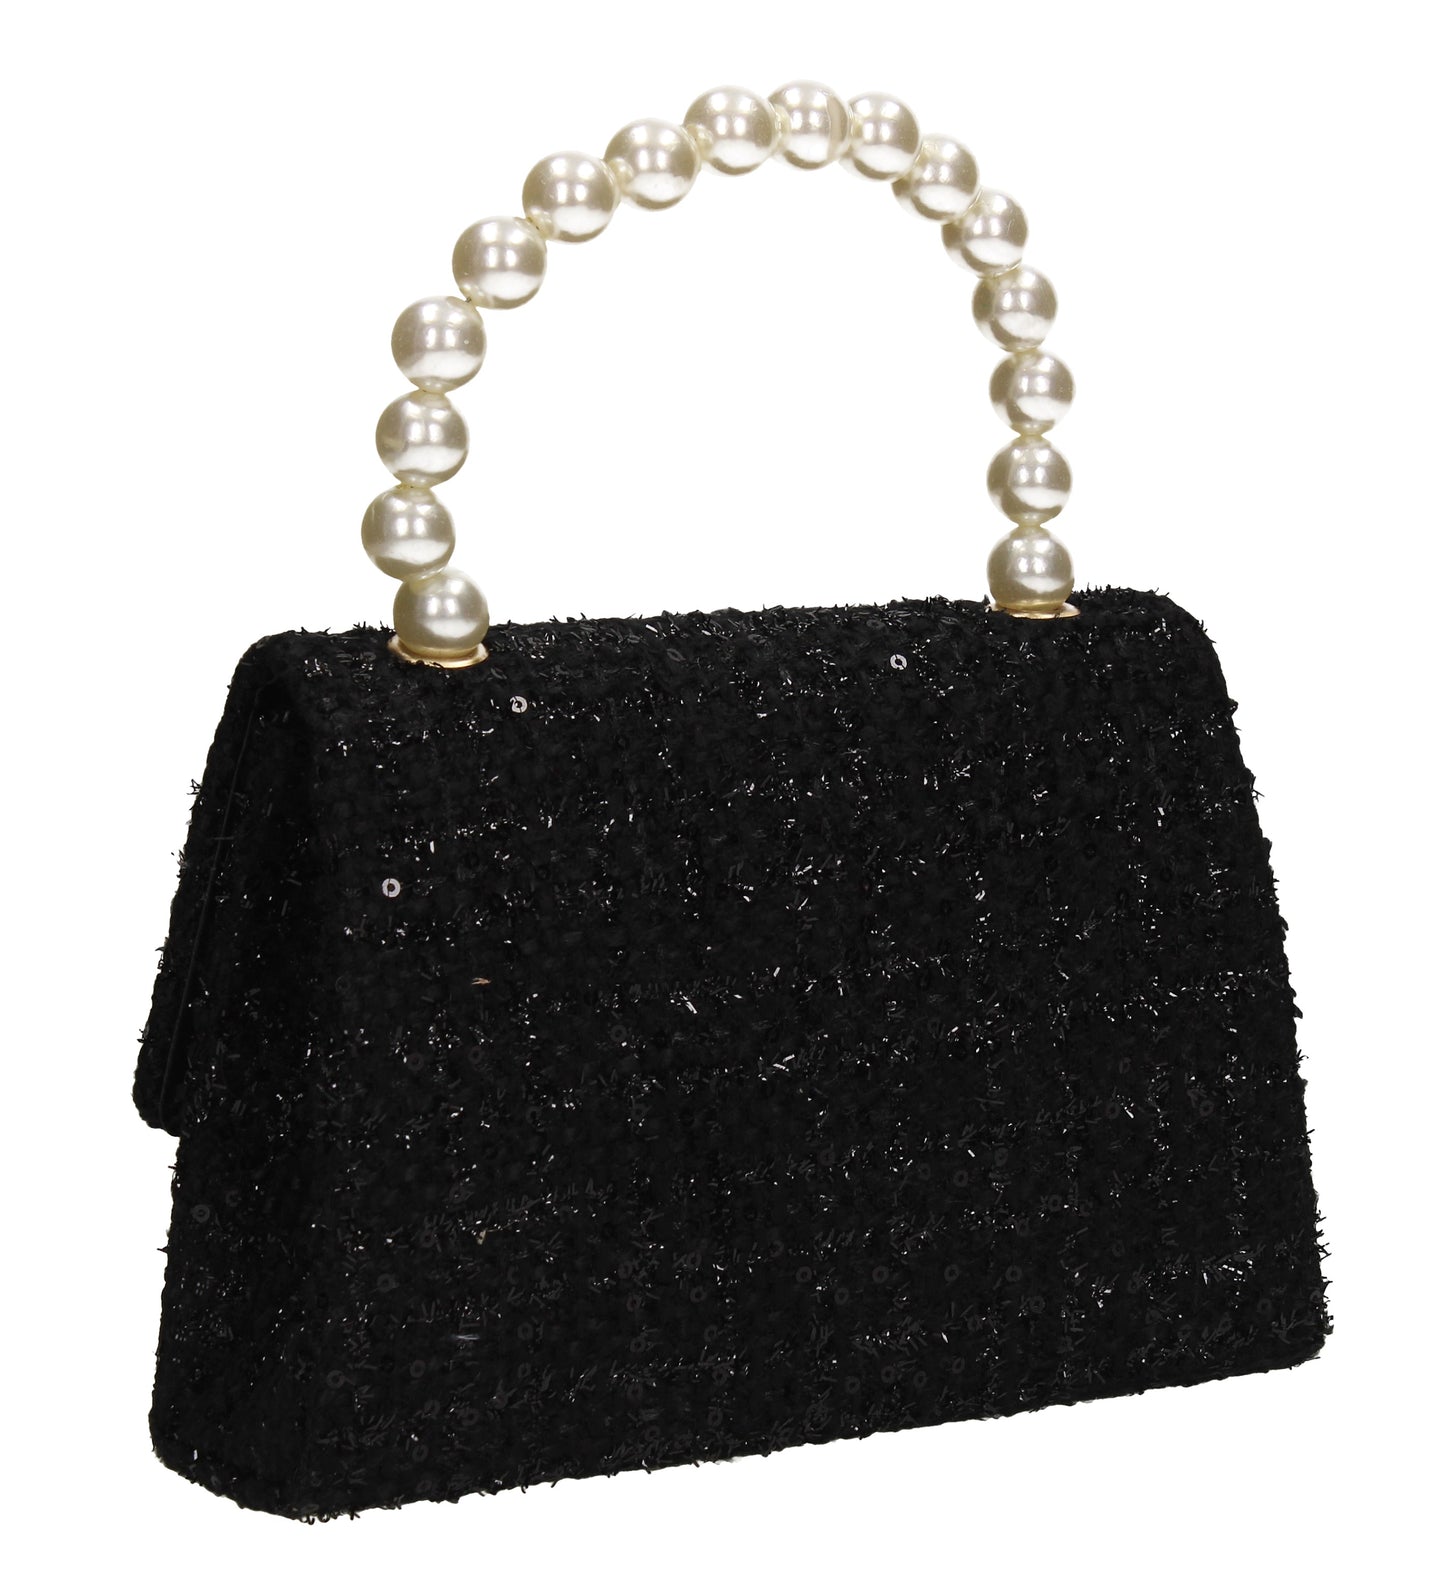 Elliana Synthetic Stitched Effect Flapover Clutch Bag Black